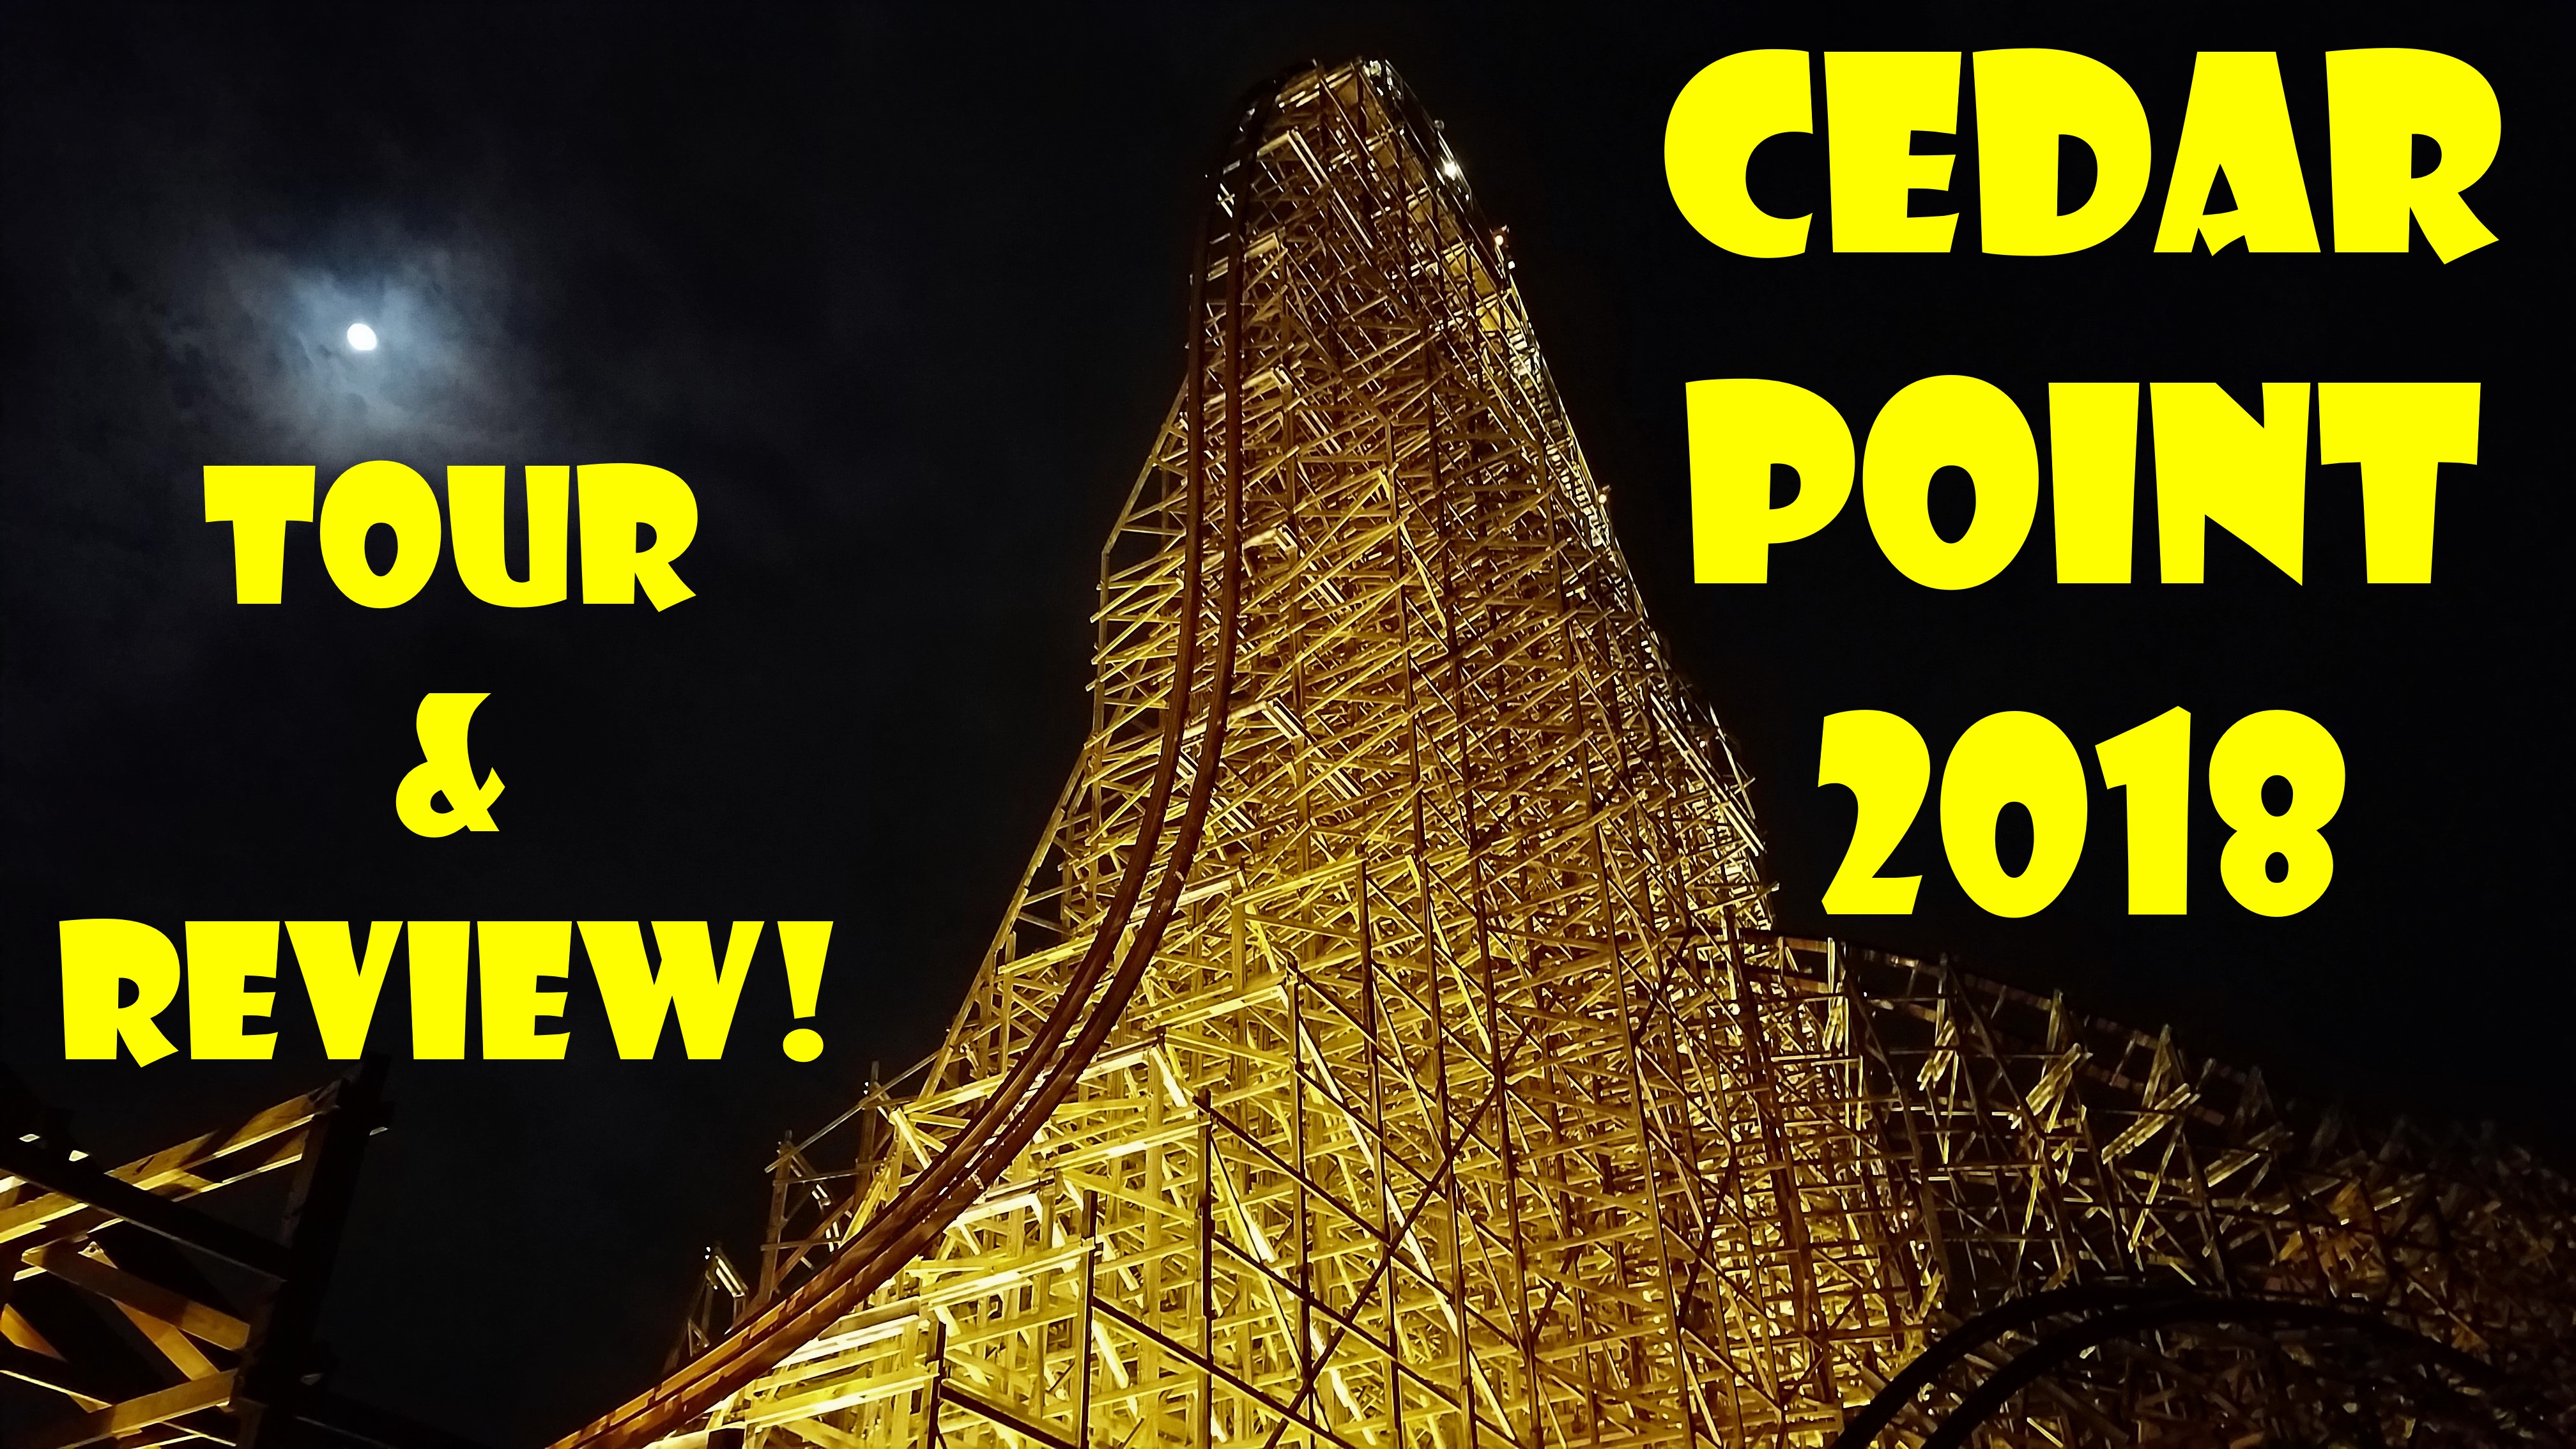 CEDAR POINT 2018 TOUR & REVIEW (NELSON’S FIRST EVER VISIT TO CP!)